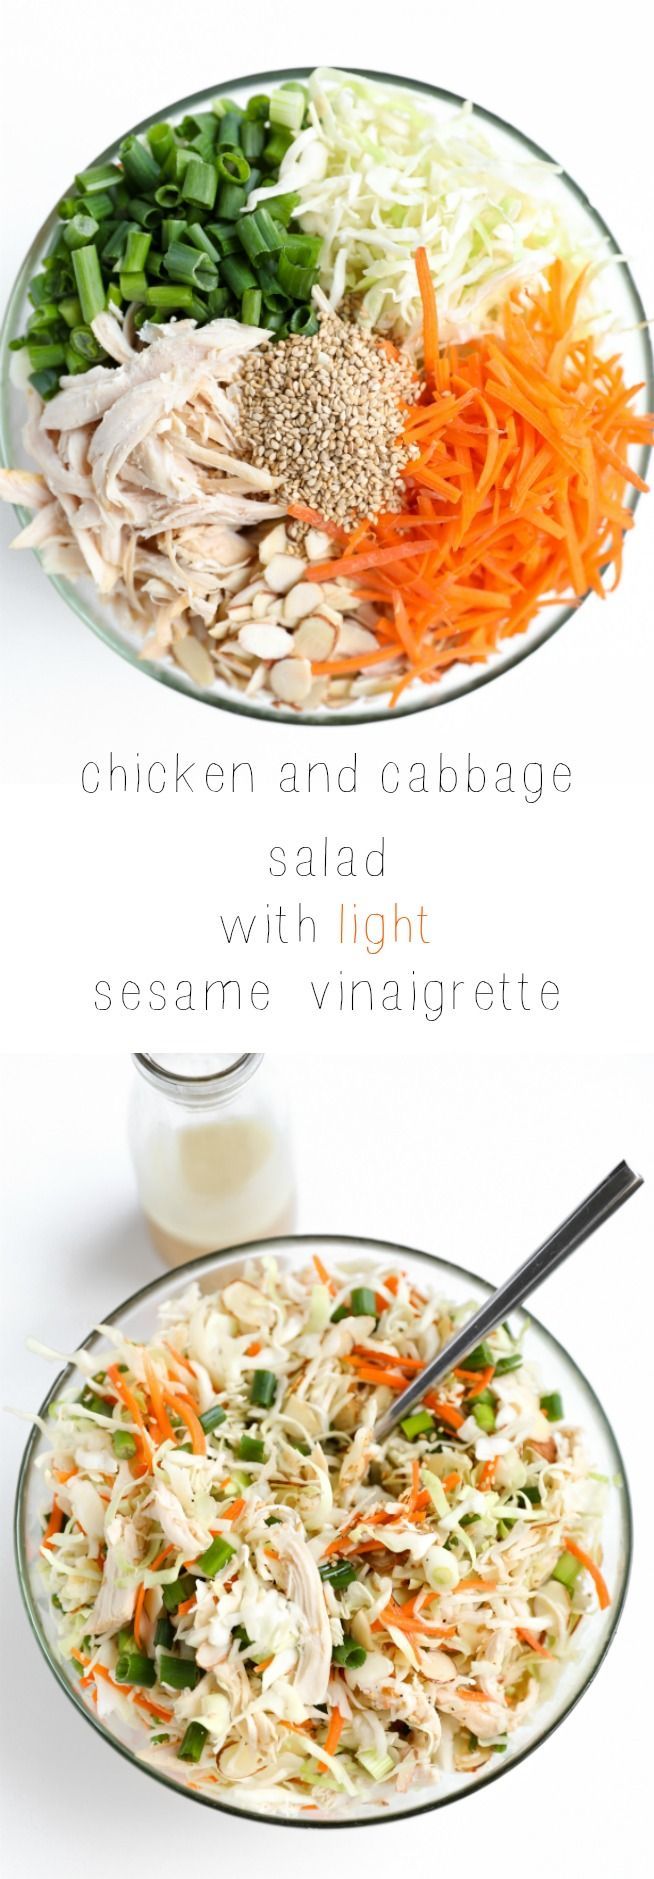 Chicken and Cabbage Salad with Light Sesame Vinaigrette. OMG, you guys, the best salad EVER and just 15 minutes start to finish.